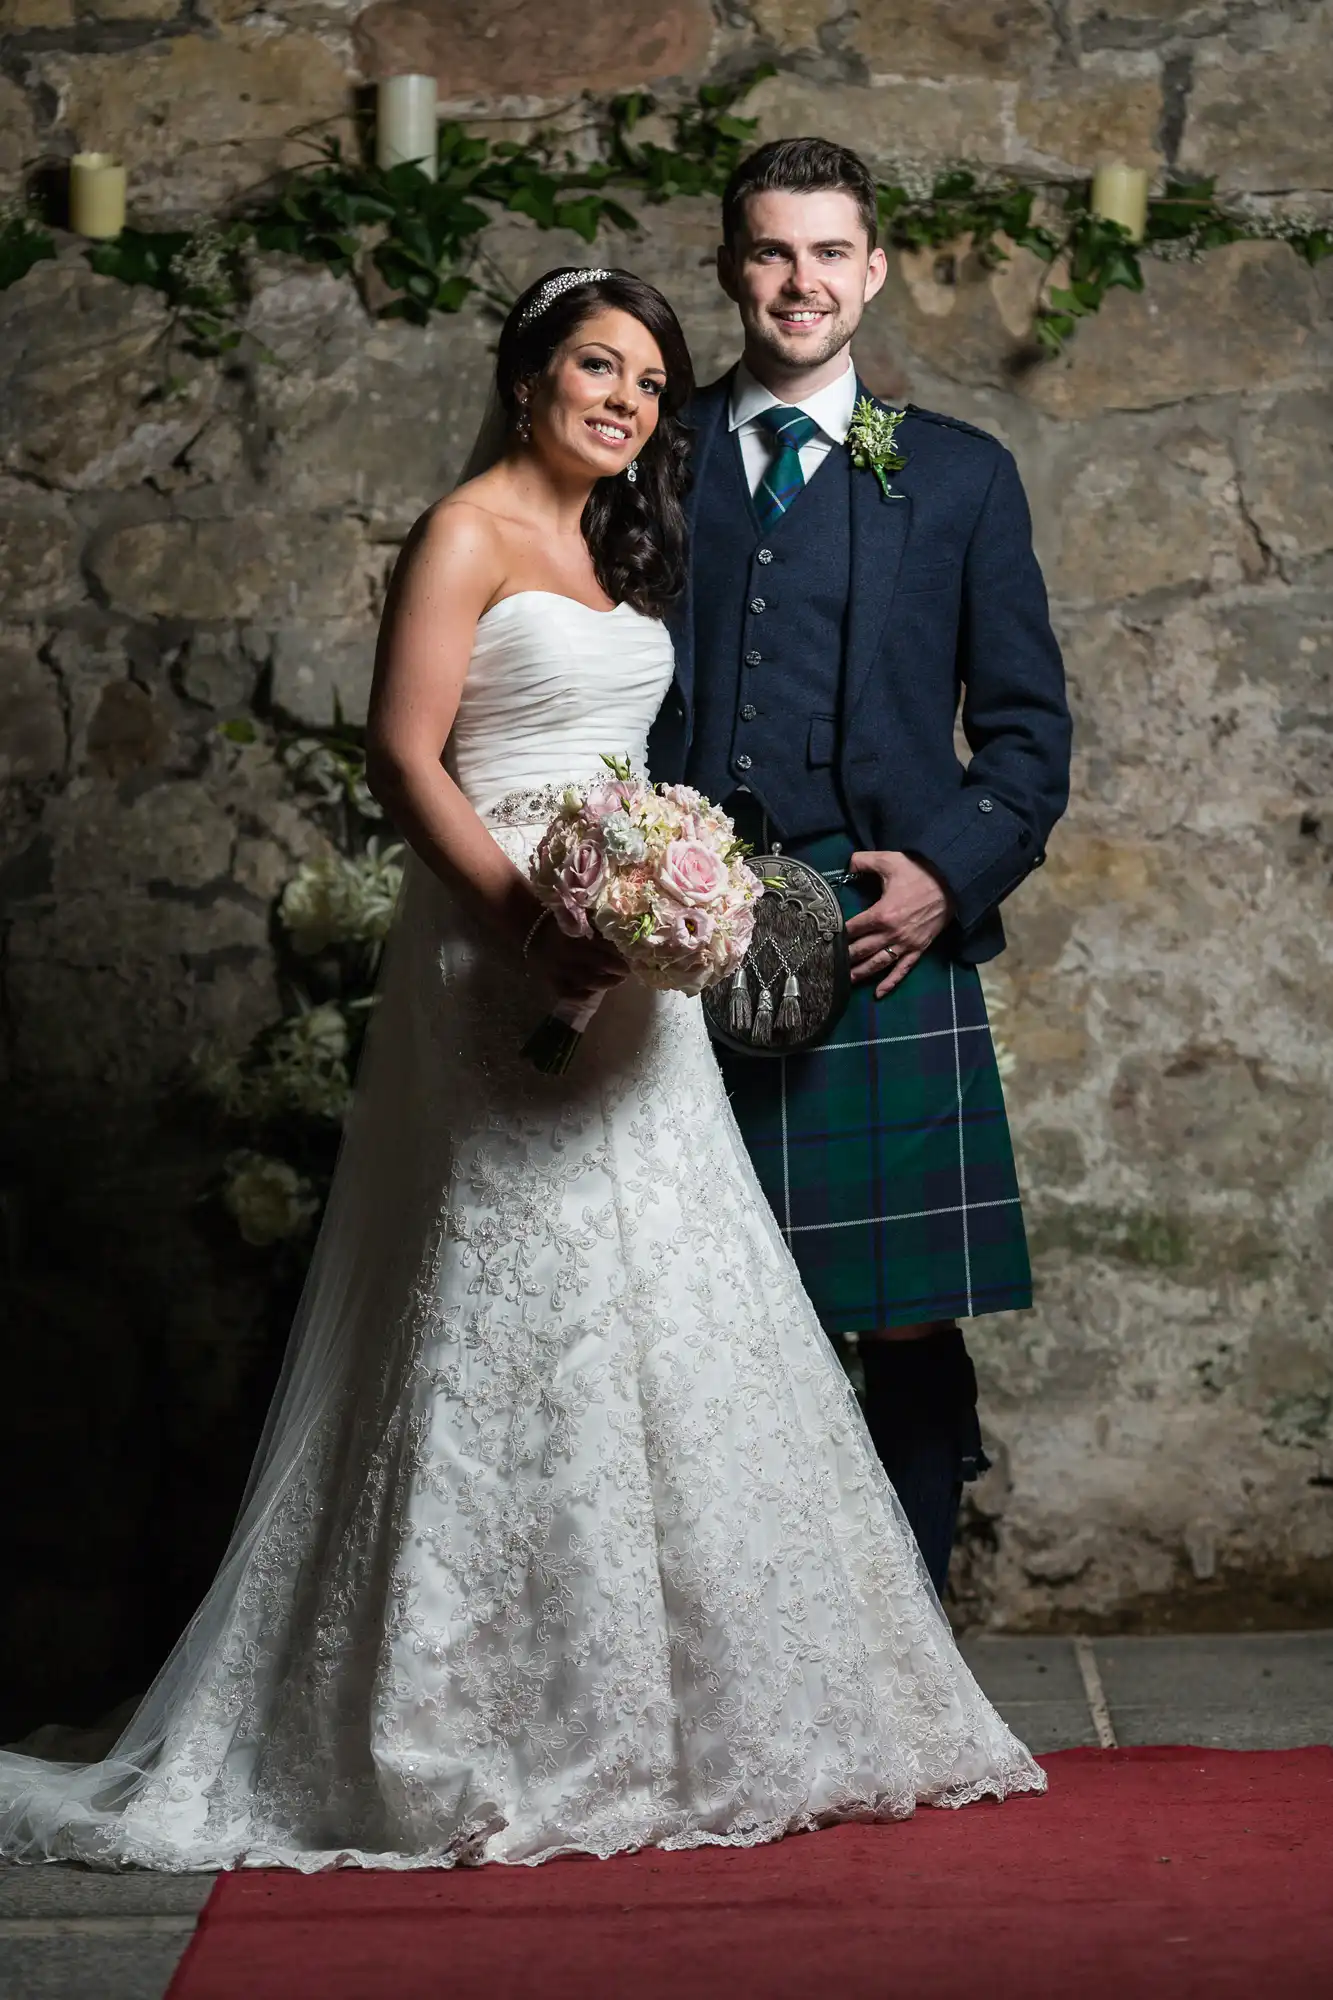 A bride and groom smiling, standing together in a traditional wedding attire; the bride in a white dress and the groom in a kilt.